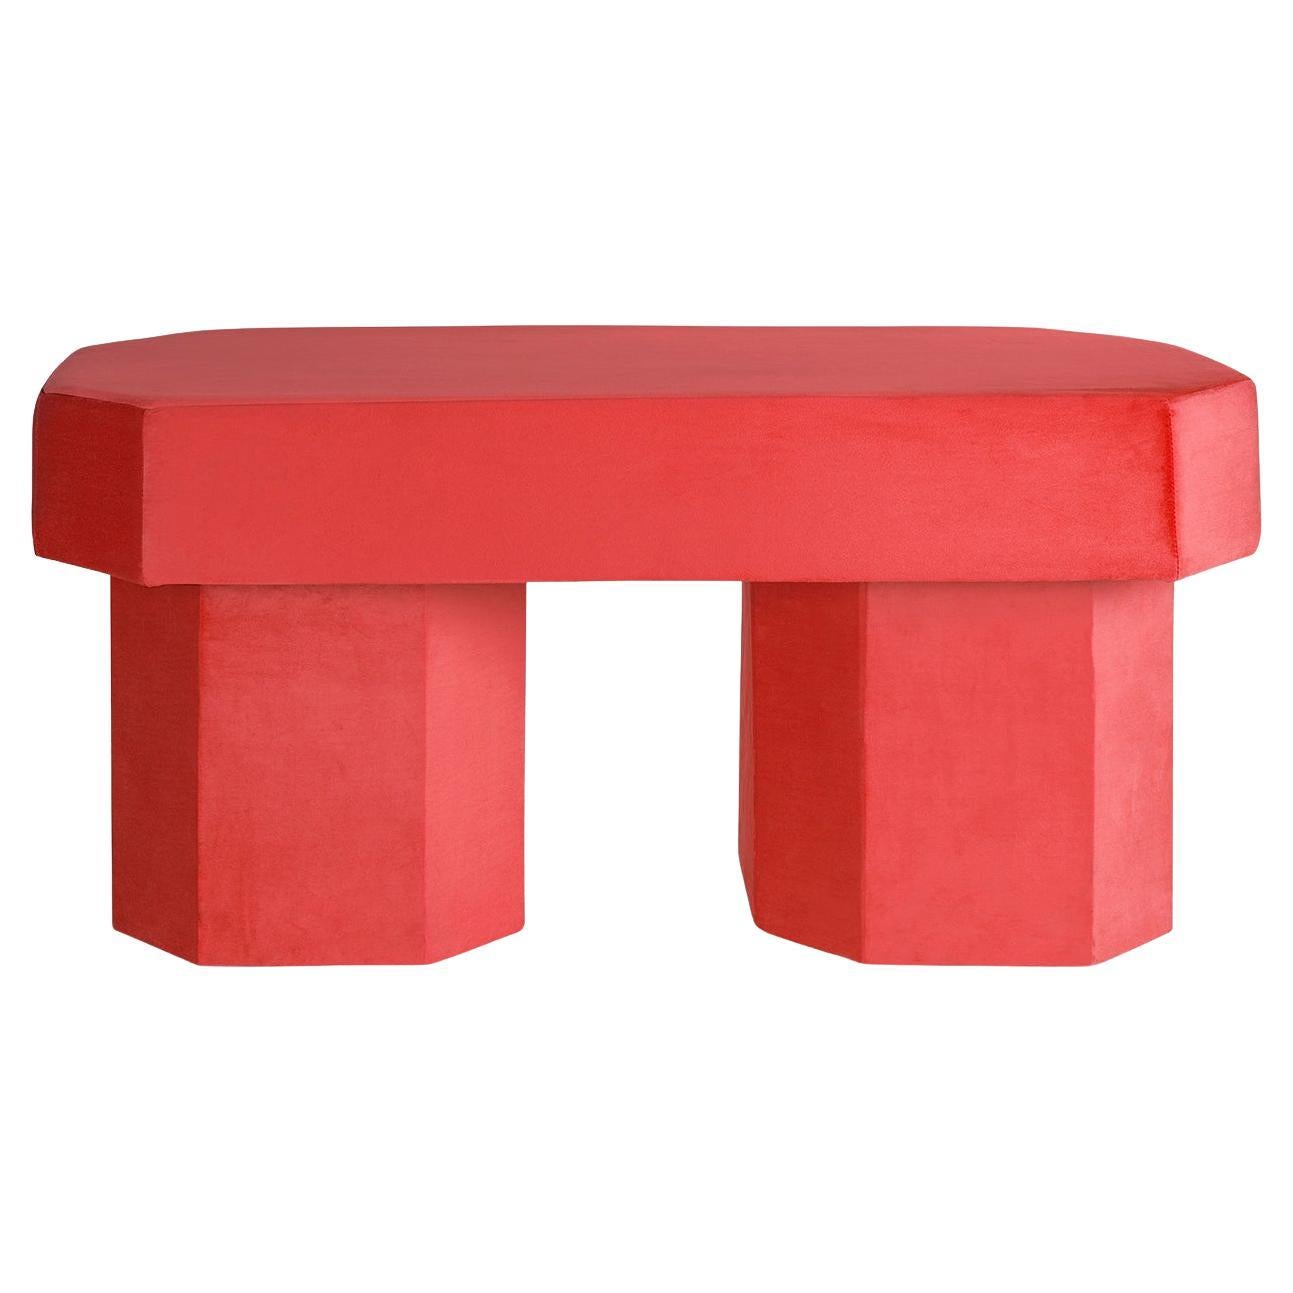 Viva Red Bench by Houtique